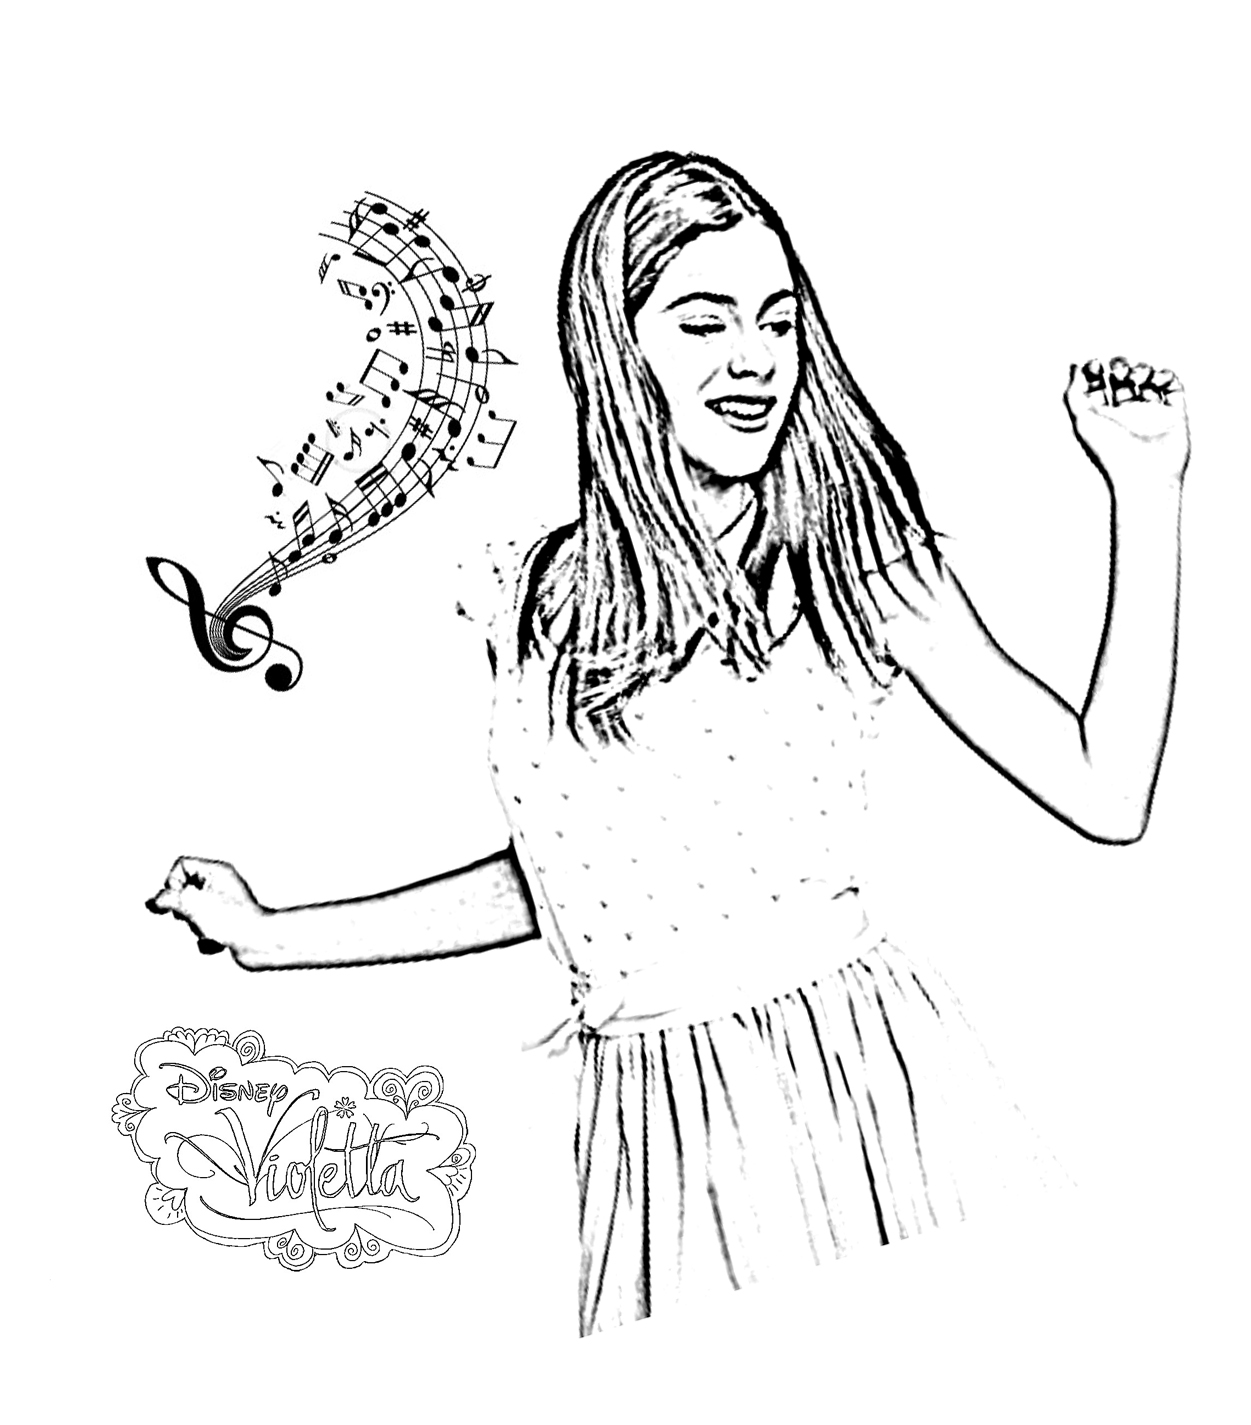 Printable Violetta coloring page to print and color